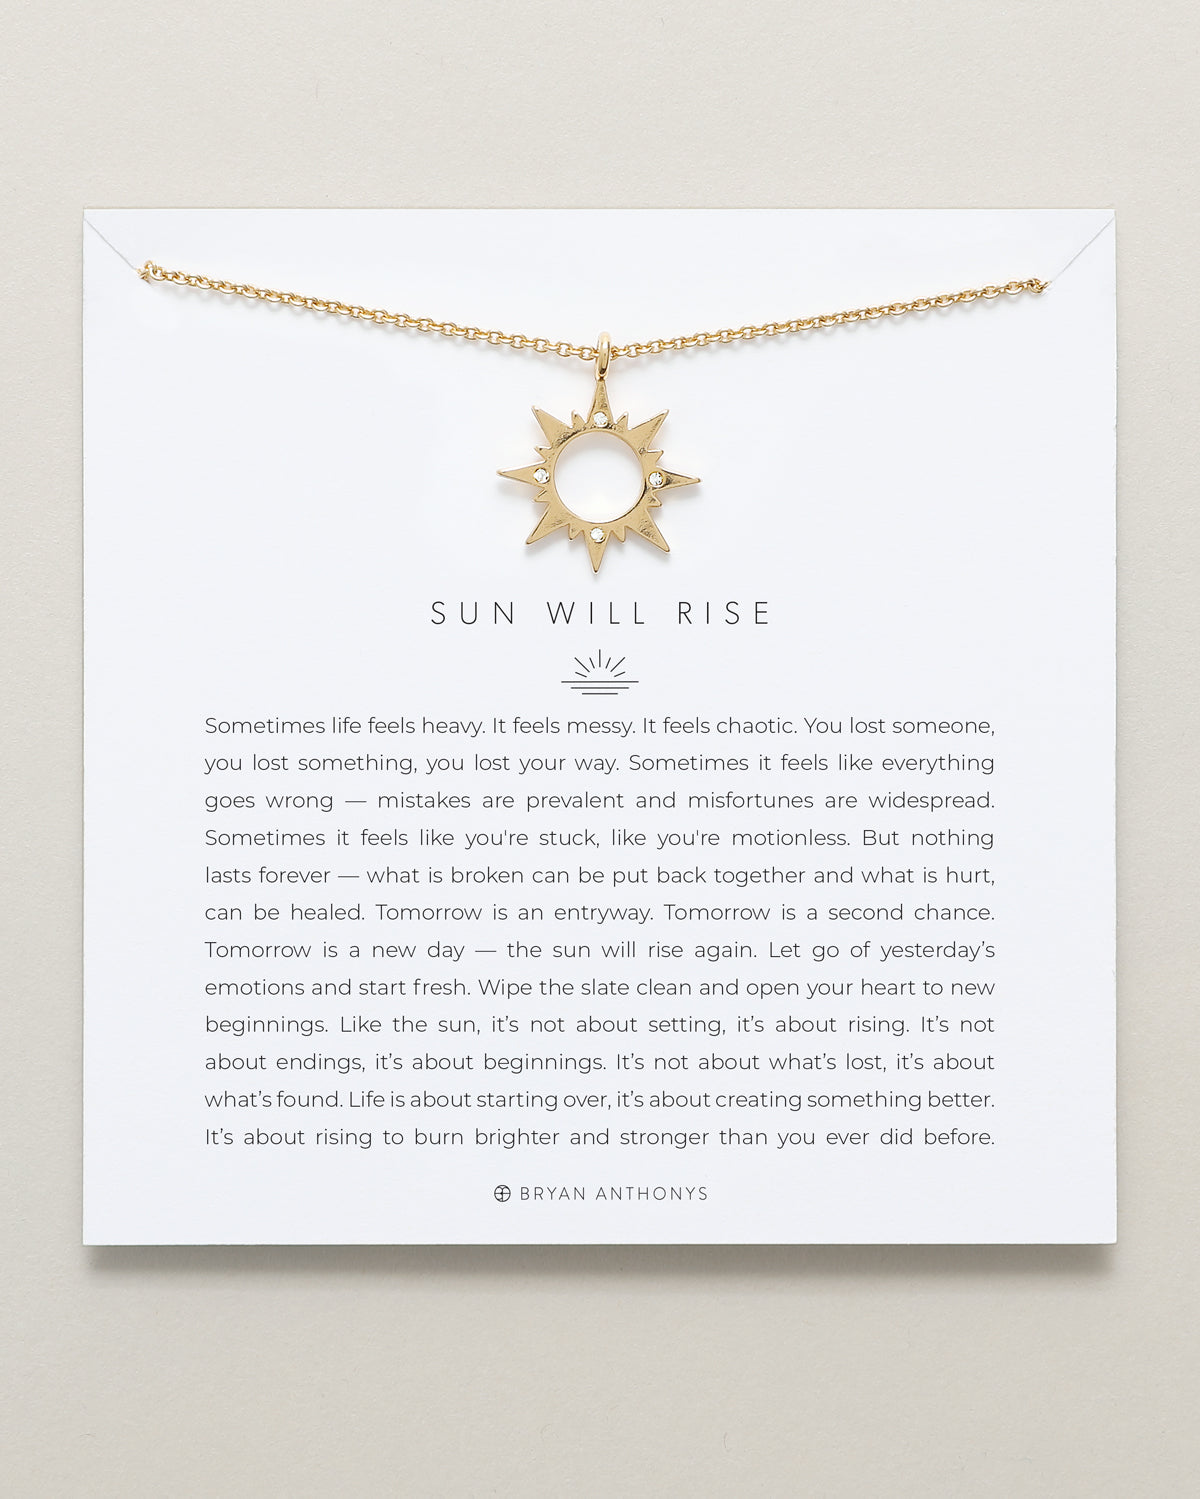 Bryan Anthonys dainty sun will rise necklace 14k gold